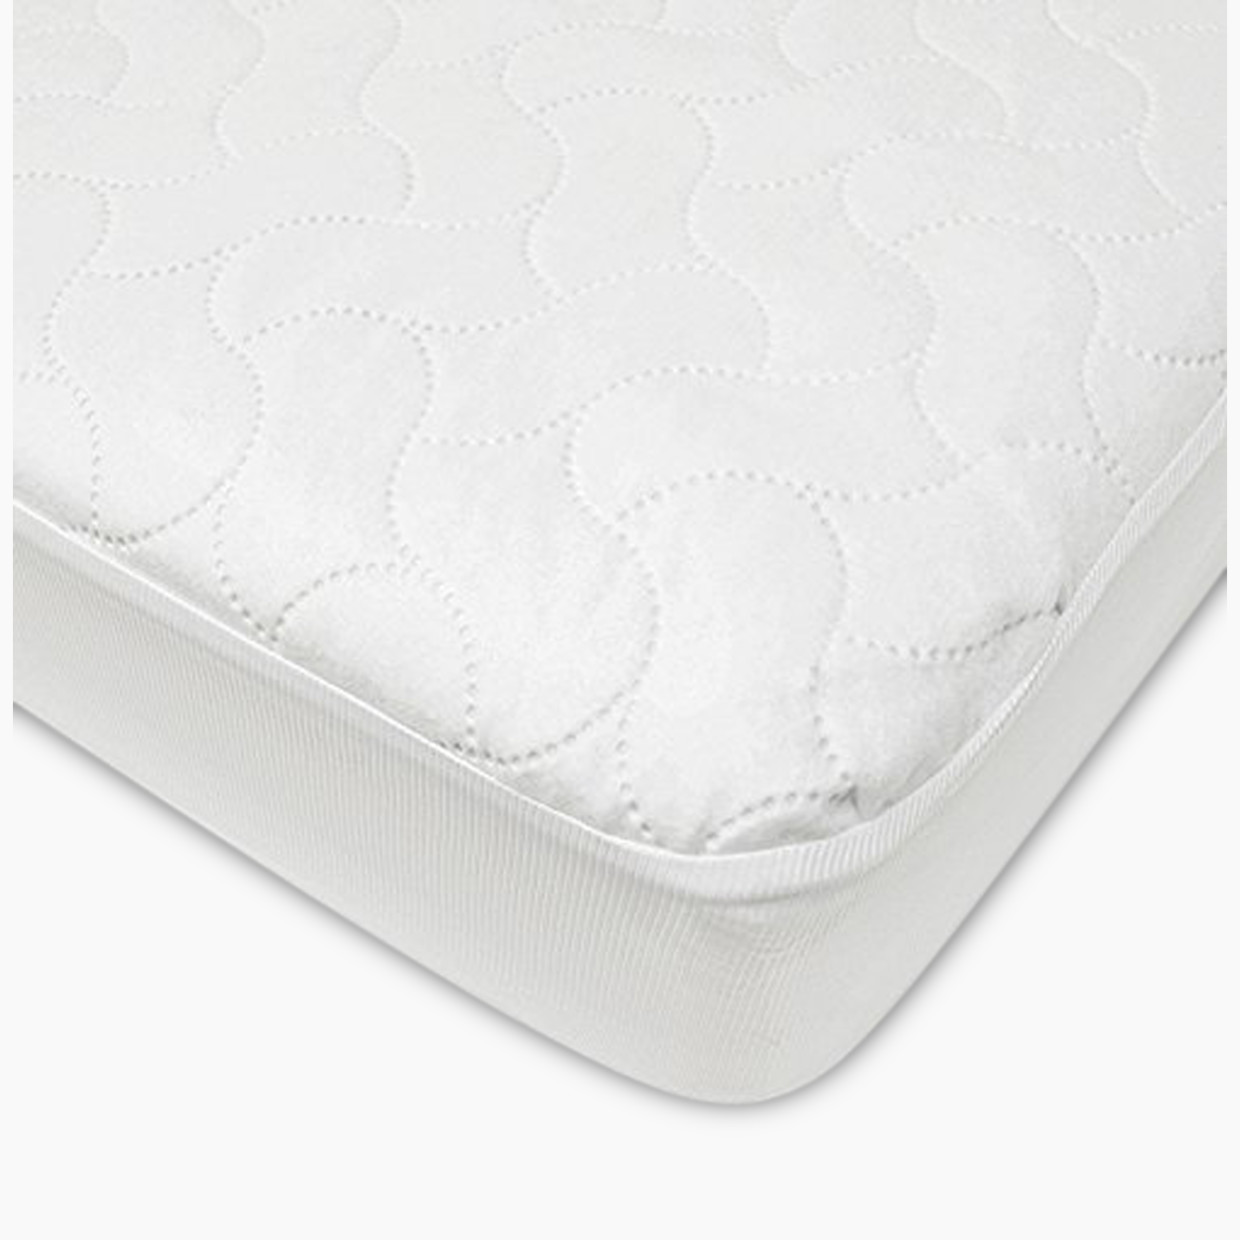 American Baby Company Fitted Waterproof Crib Mattress Pad Cover - White, 1 Pack.